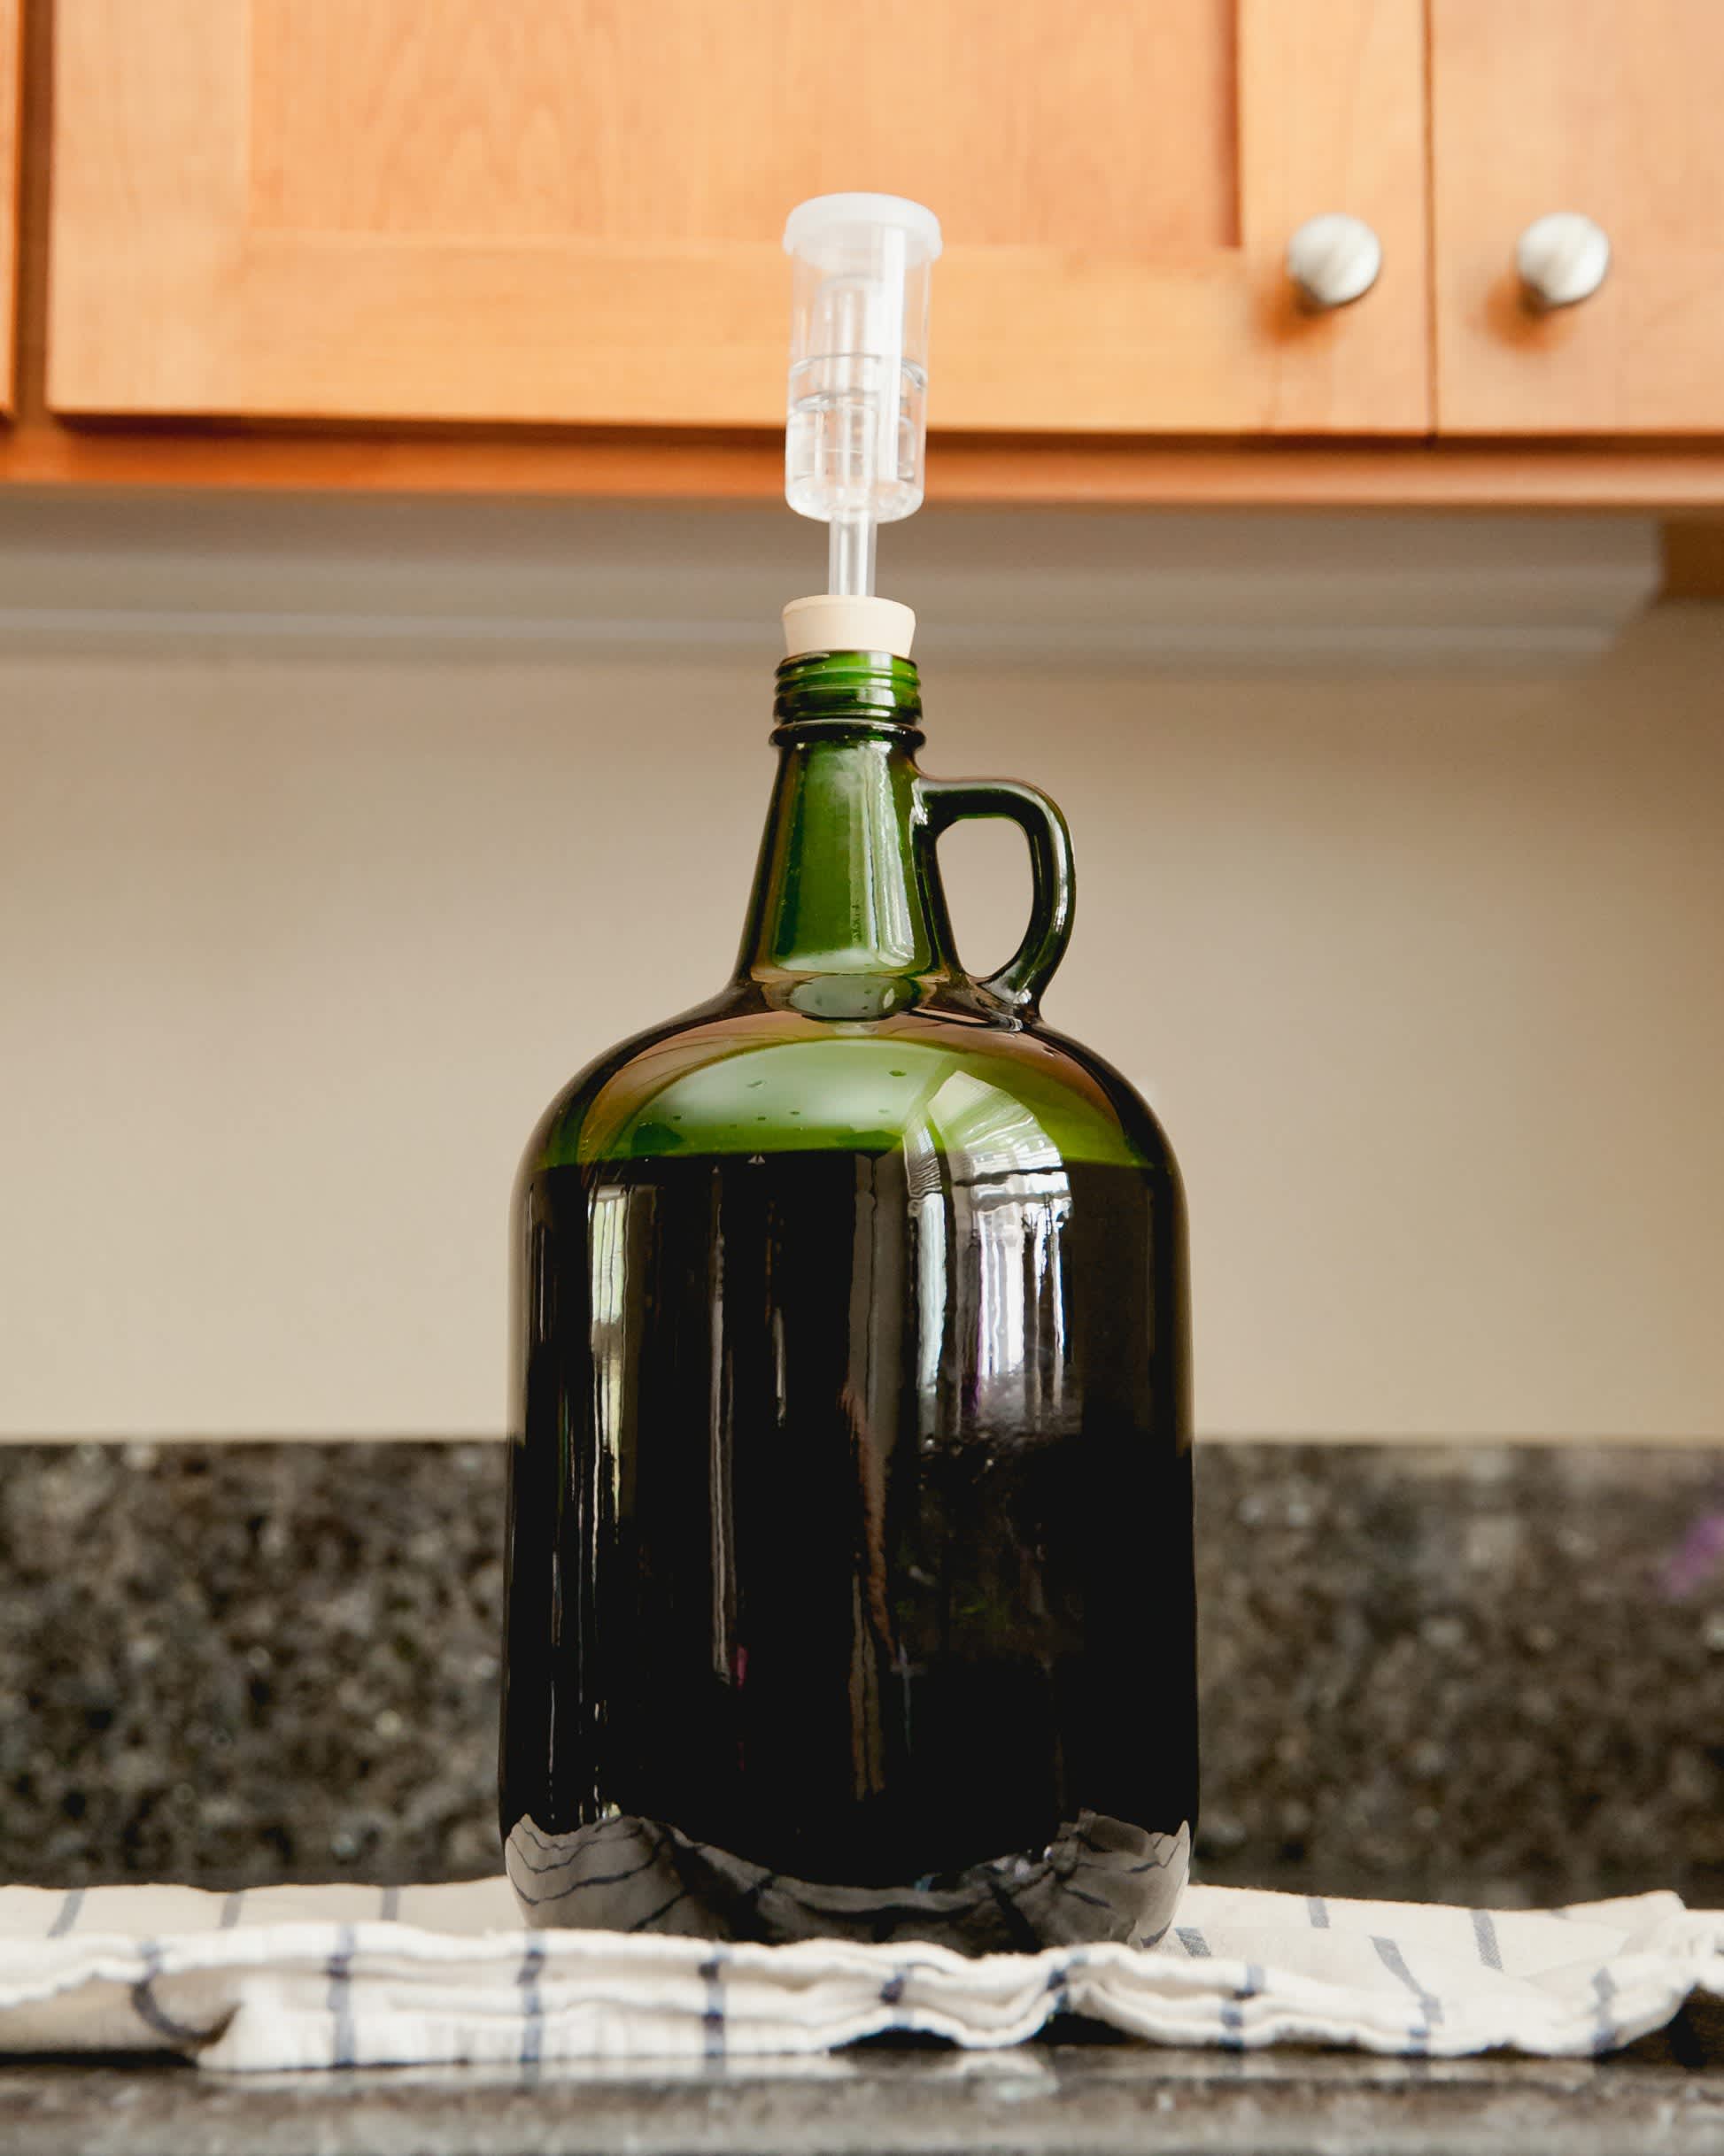 How to Transfer and Siphon Beer